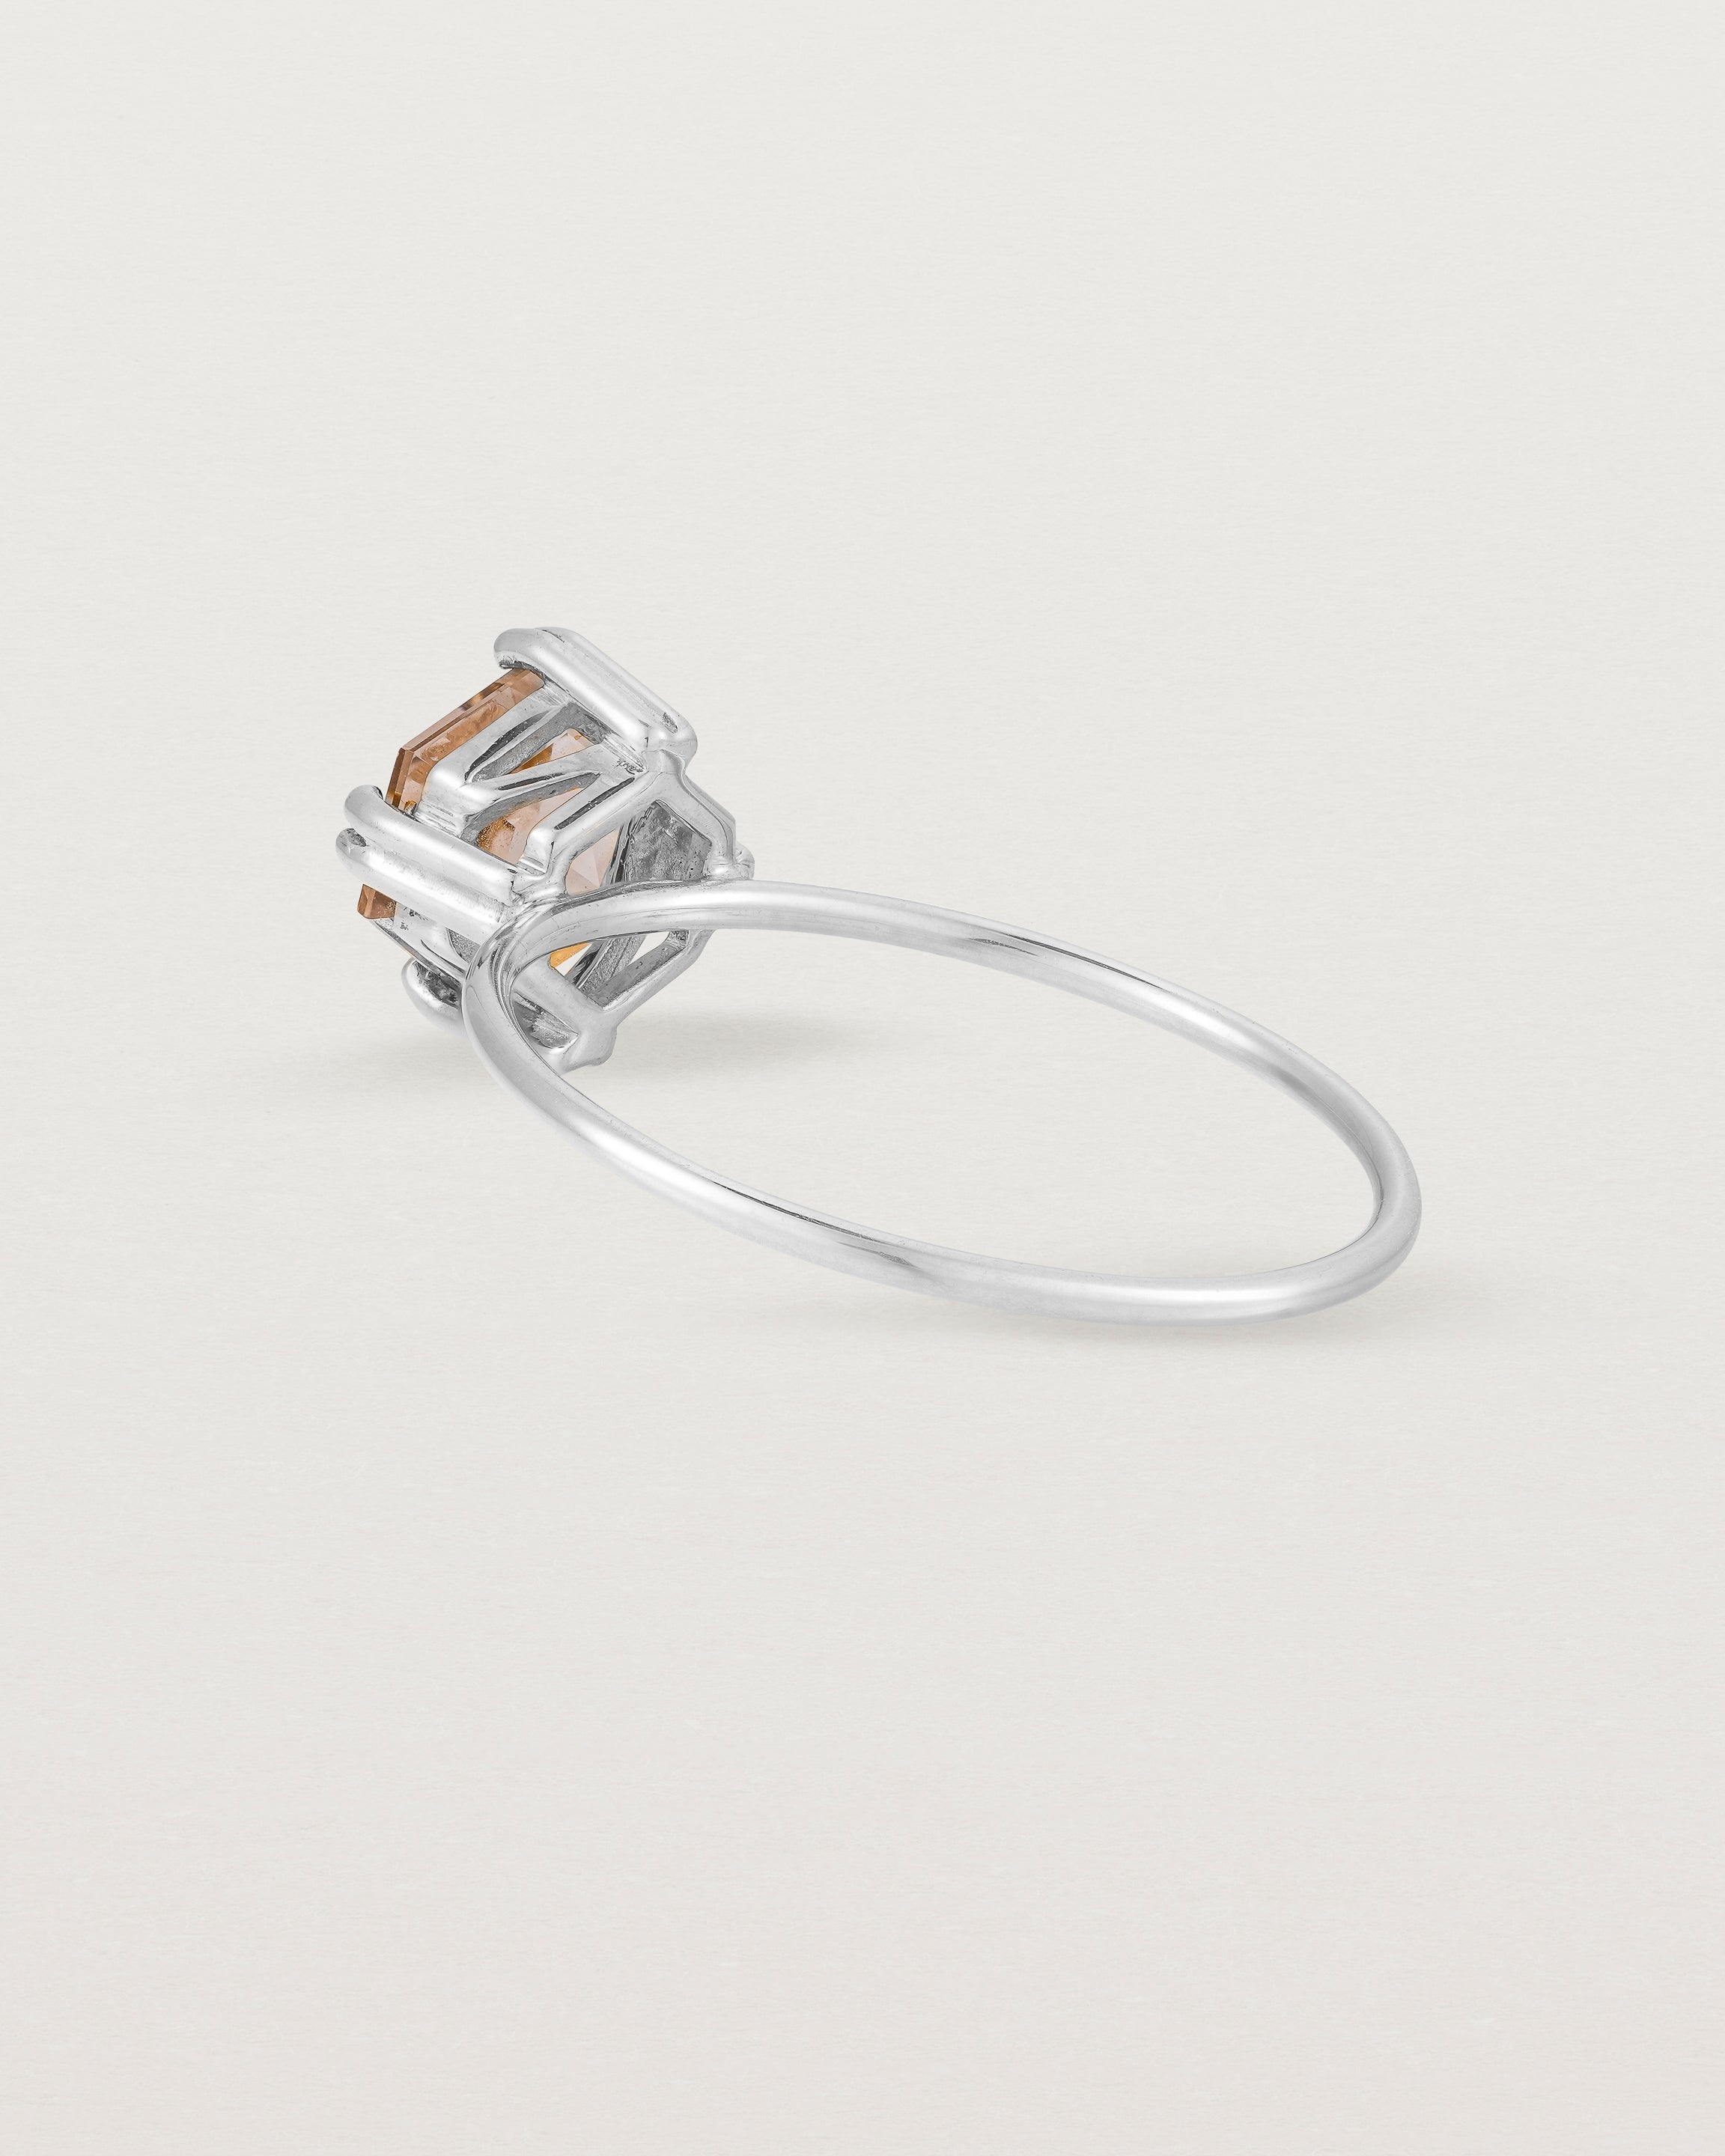 Back view of the Hexagon Ring | Smokey Quartz in Sterling Silver.